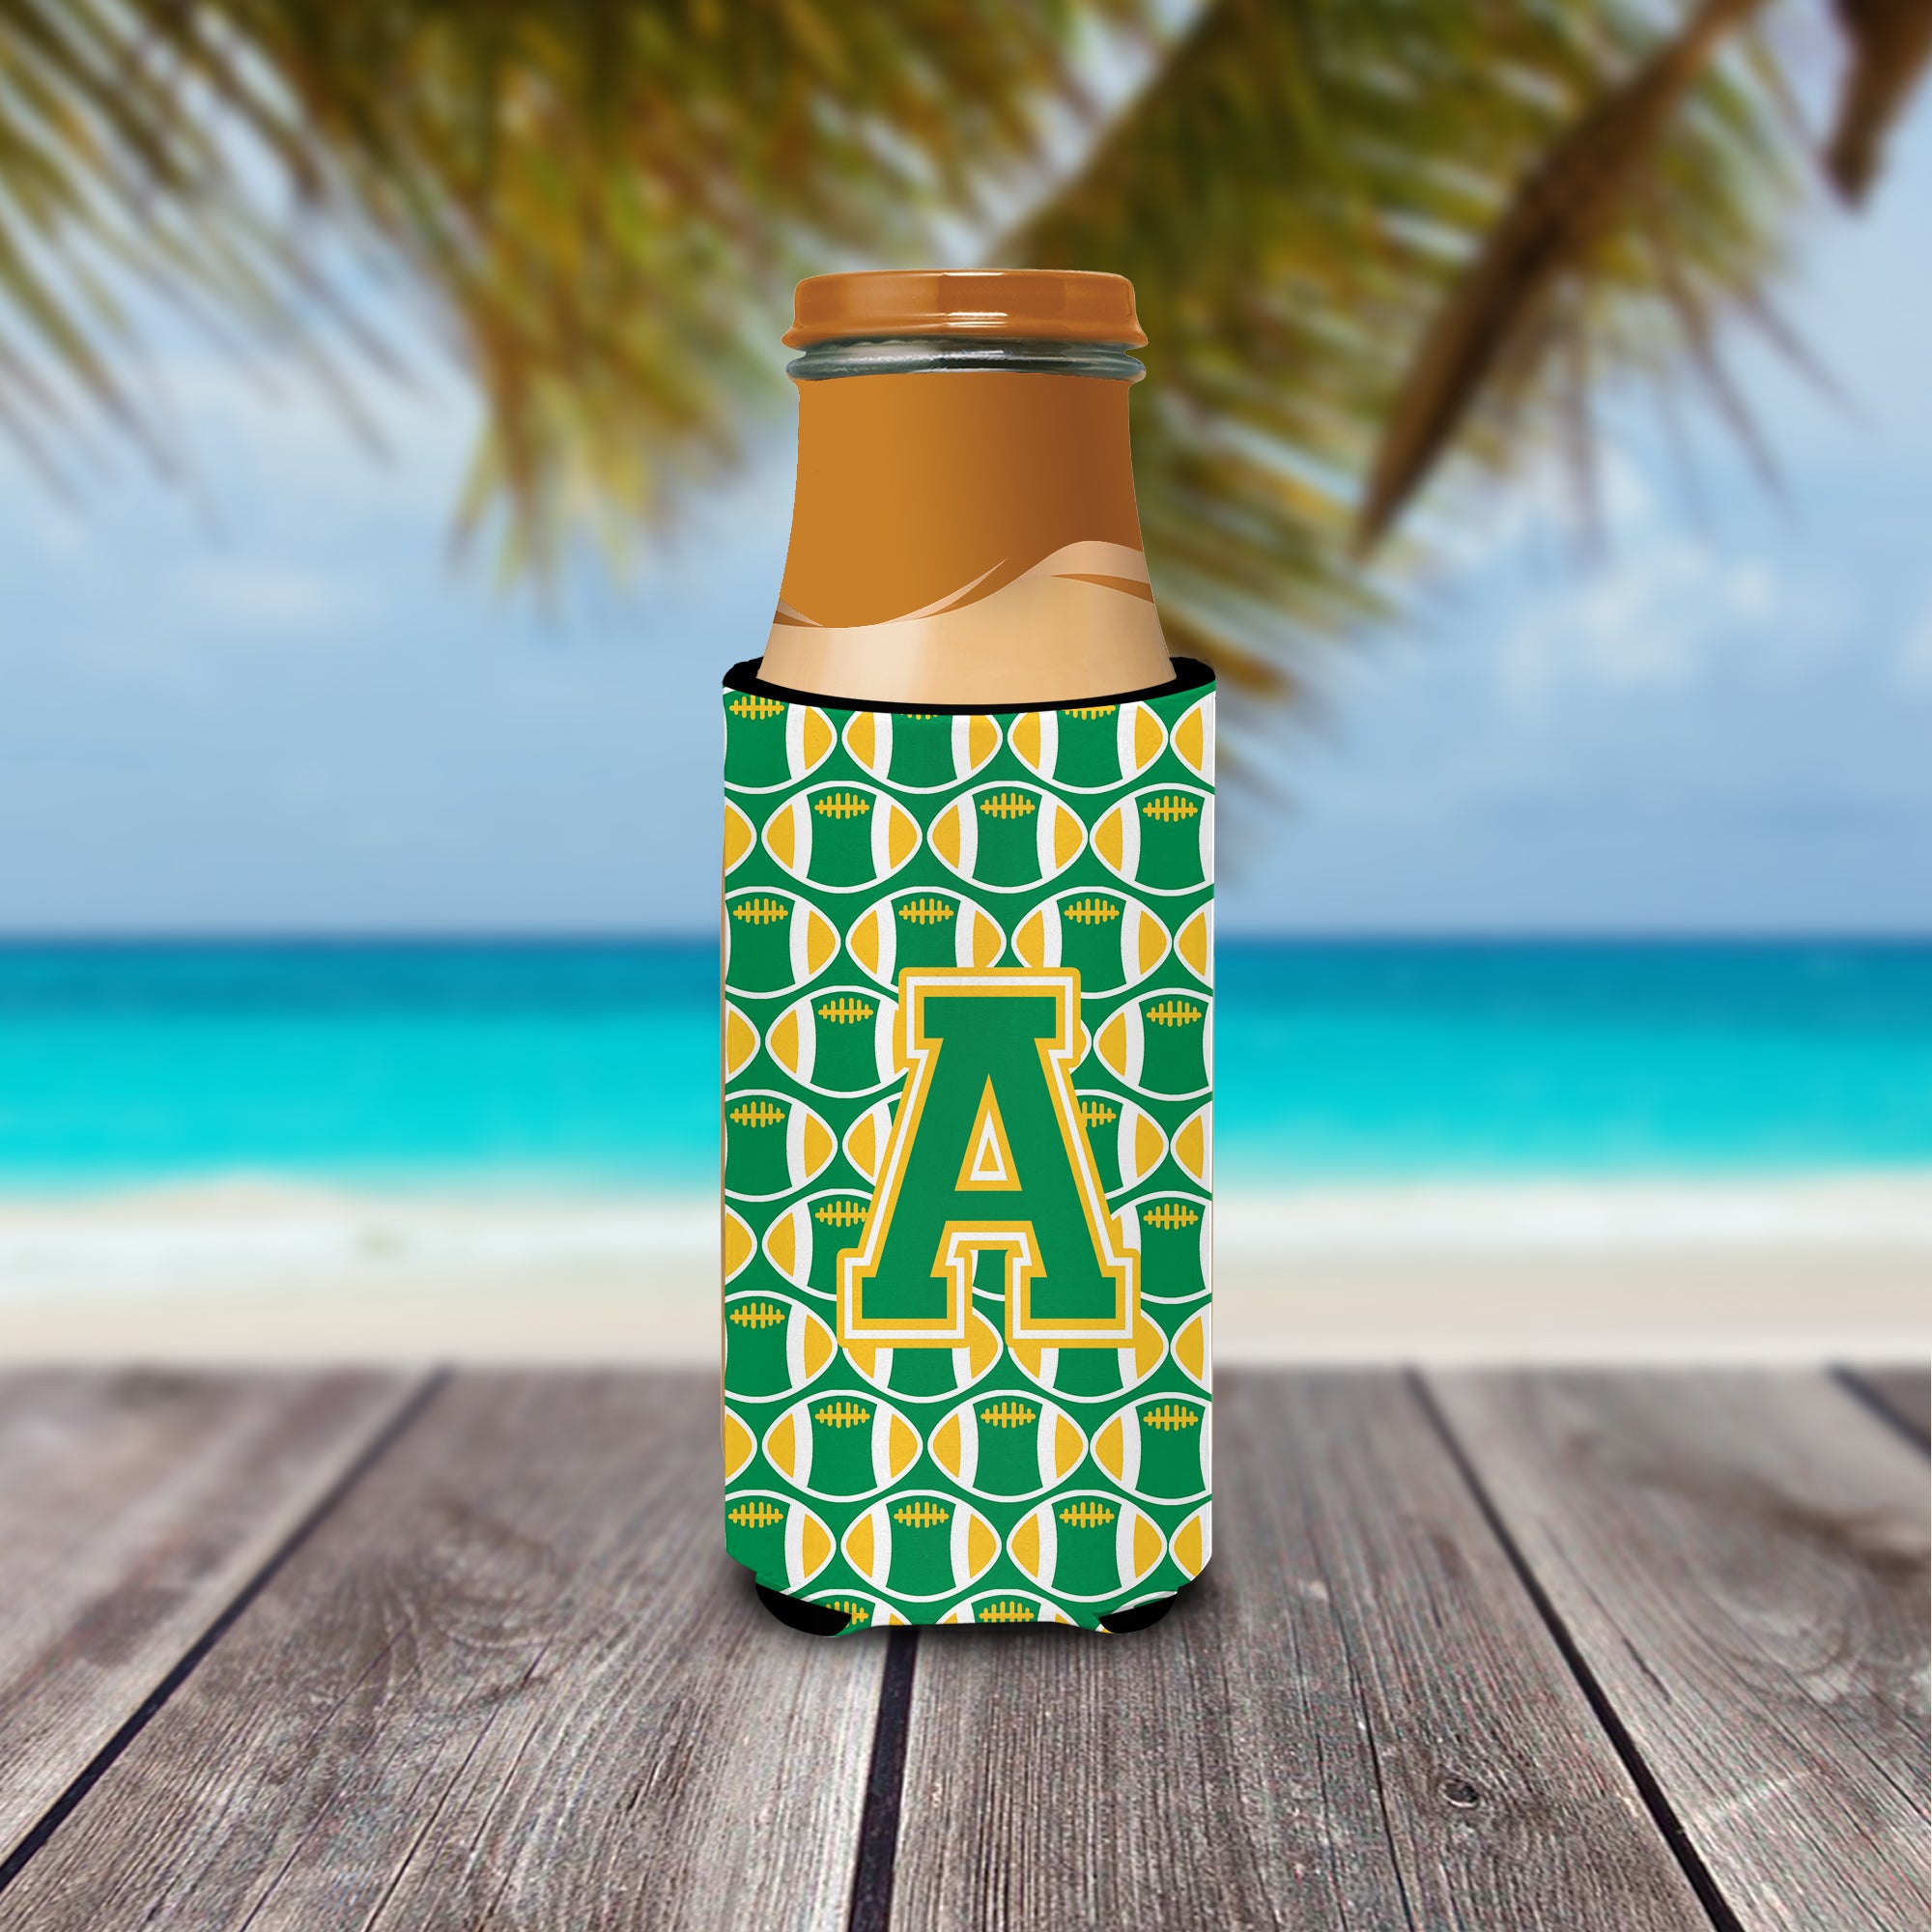 Letter A Football Green and Gold Ultra Beverage Insulators for slim cans CJ1069-AMUK.